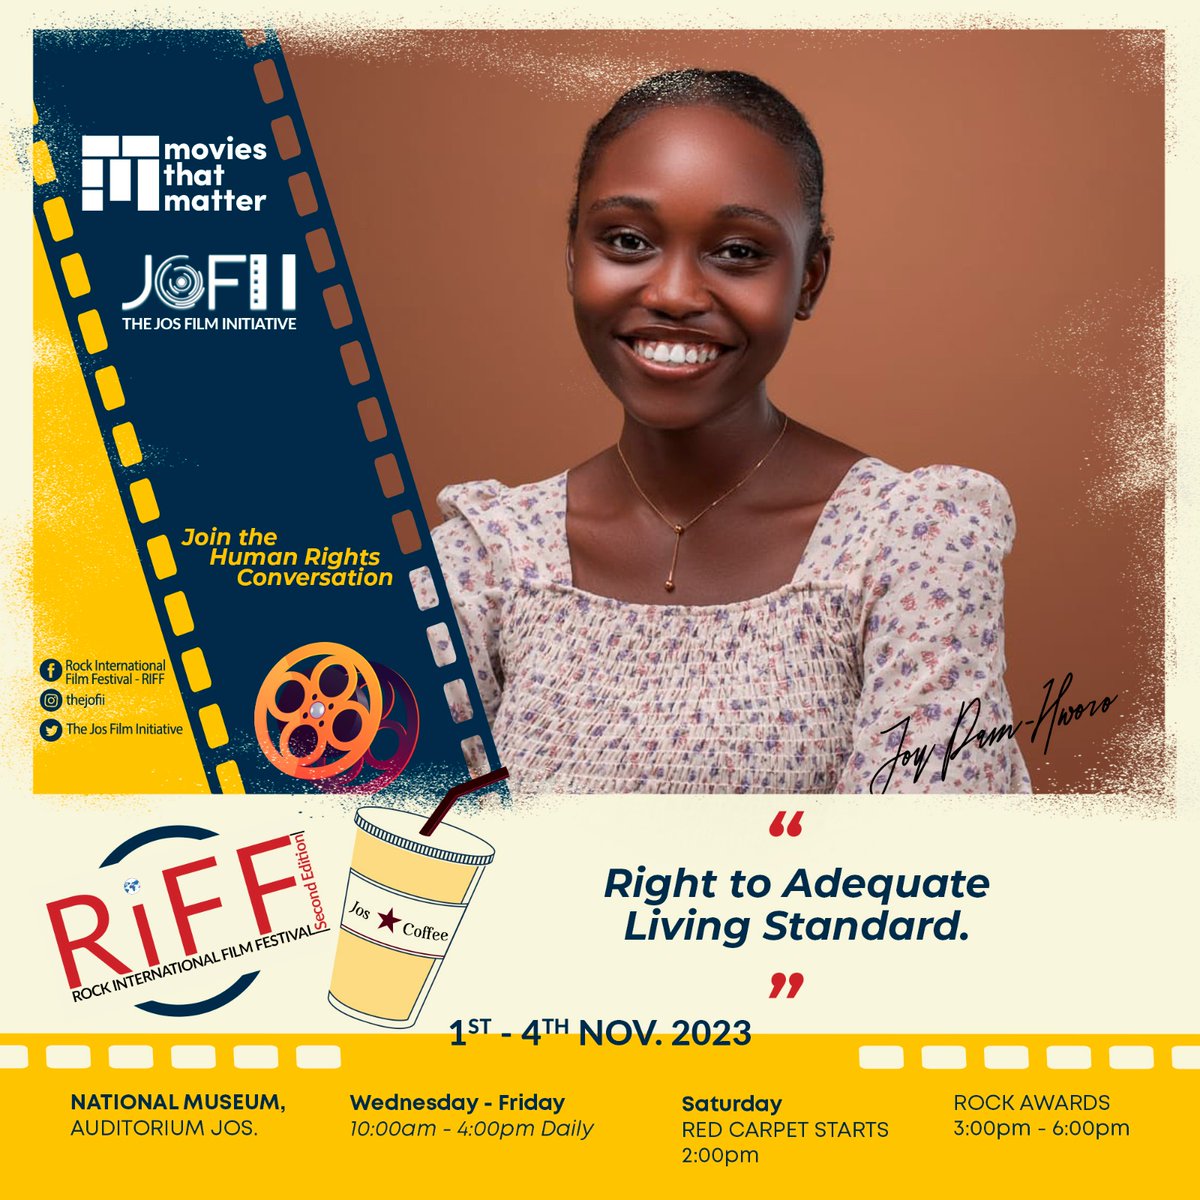 I'm lending my voice and joining the conversation. #RIFF #JosFilmFestival #HumanRightsMovies